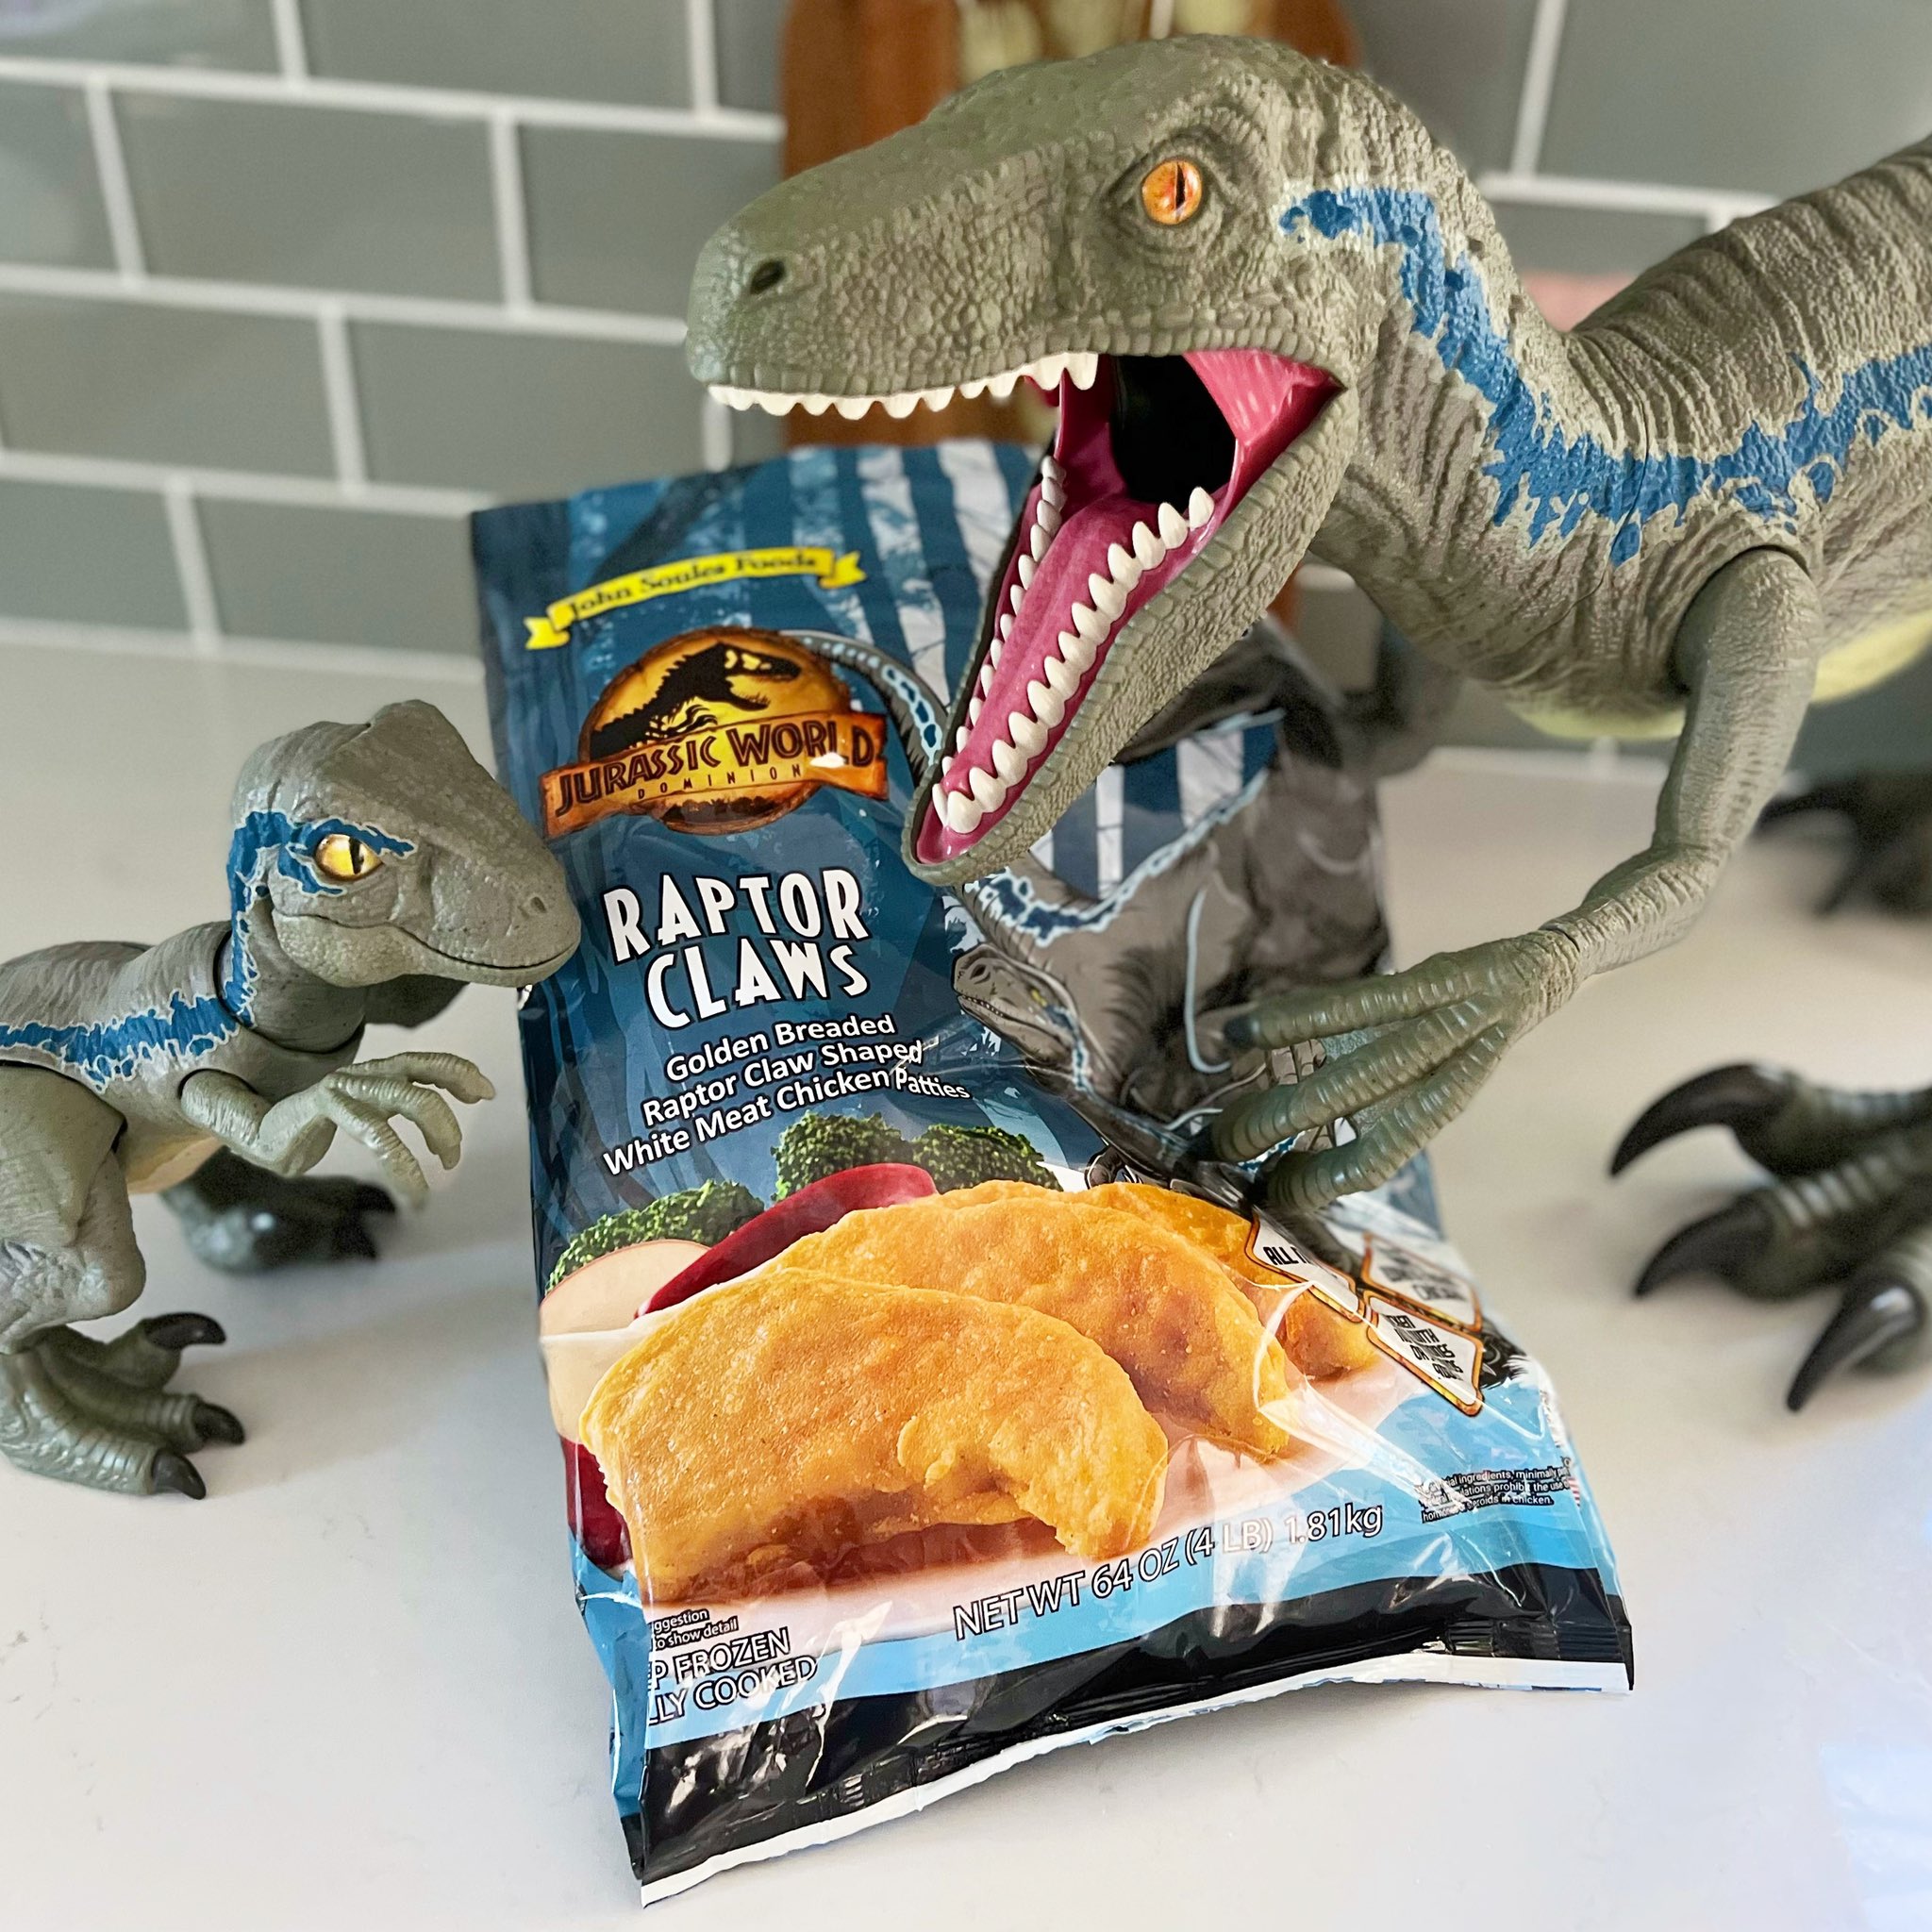 Collect Jurassic on X: TASTES LIKE CHICKEN! @johnsoulesfoods just dropped  the official chicken tenders of Jurassic World Dominion — appropriately  named “Raptor Claws”. They're delicious too, seasoned with just the right  amount